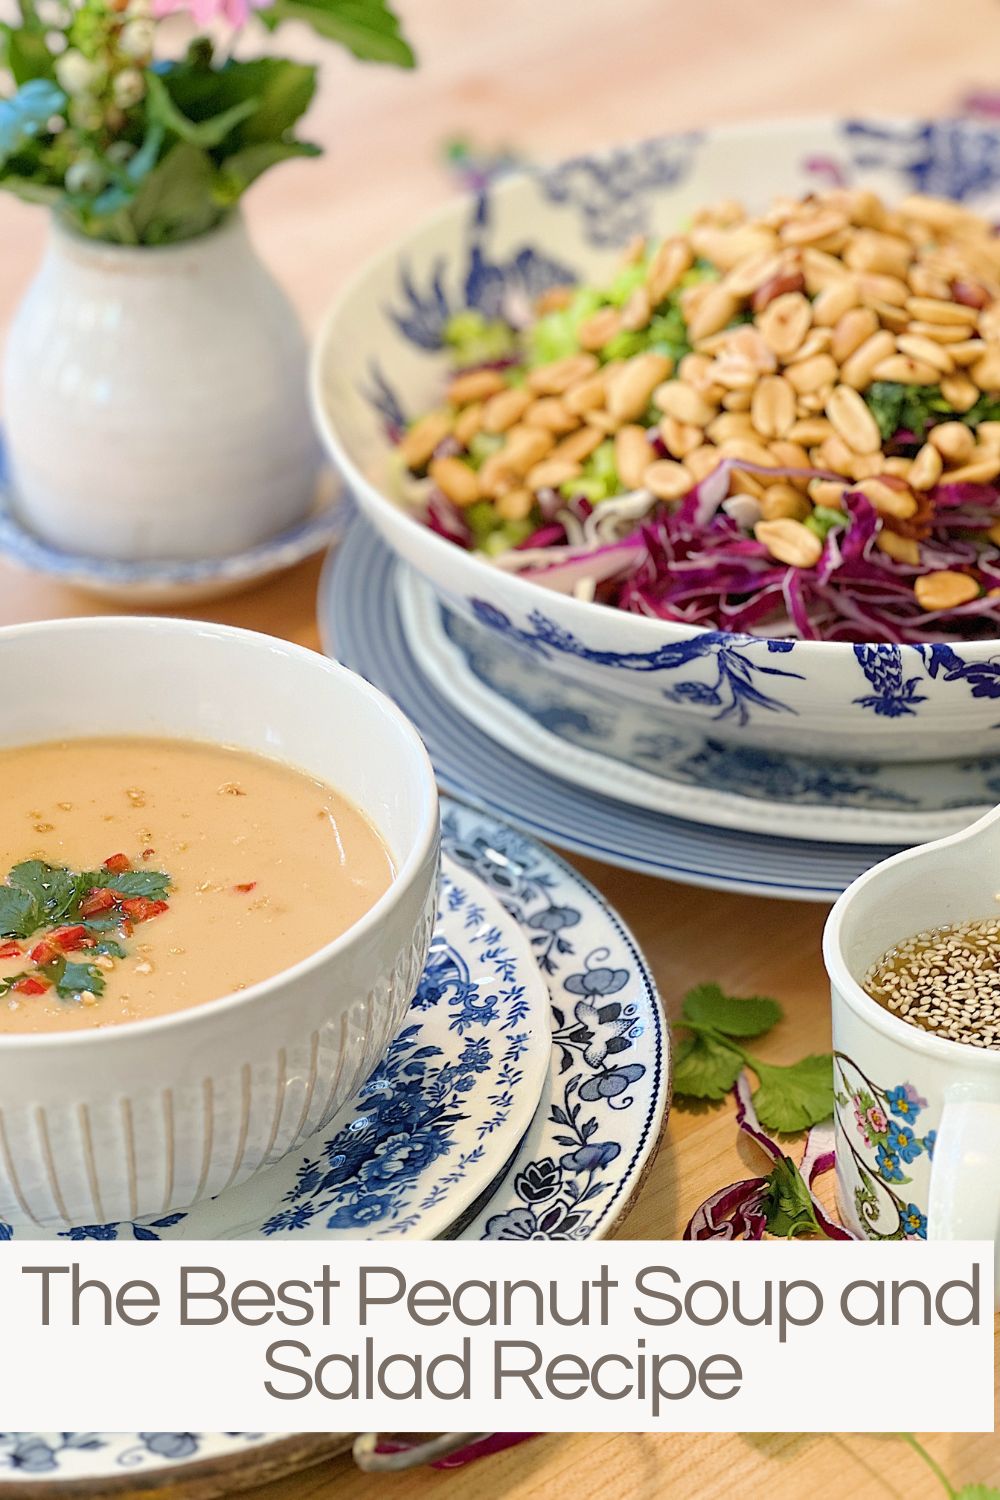 This is the perfect time of year for soup and salad. Today I am sharing recipes for a crunchy coleslaw salad paired with a warm peanut soup. 